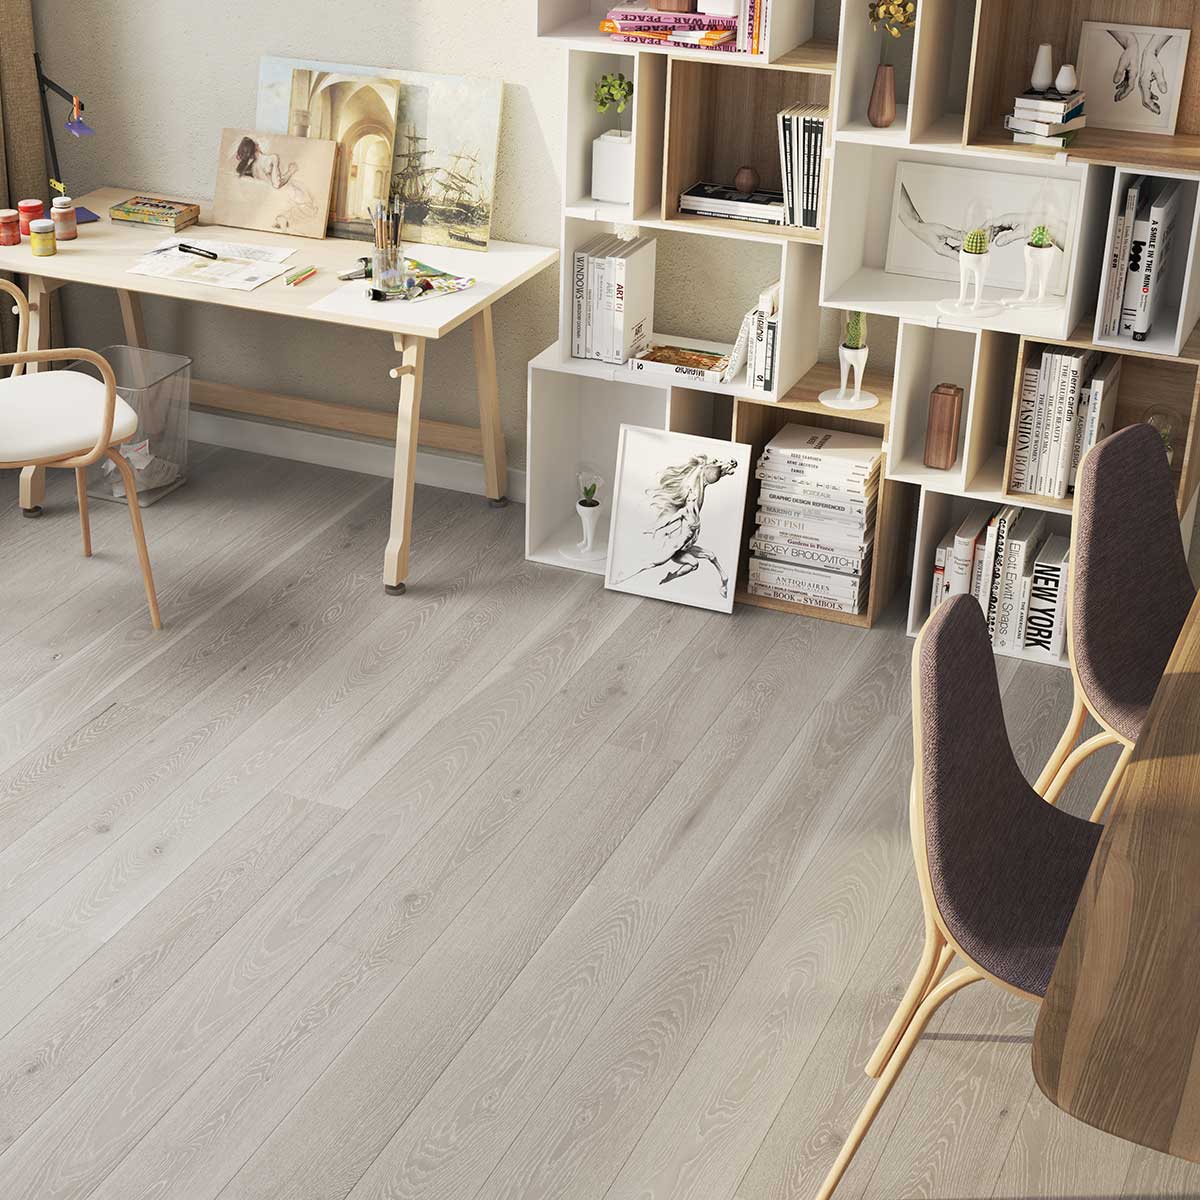 AL104 Silver Sands - Colour Stained & Matt Lacquered Rustic Oak Bevelled Plank